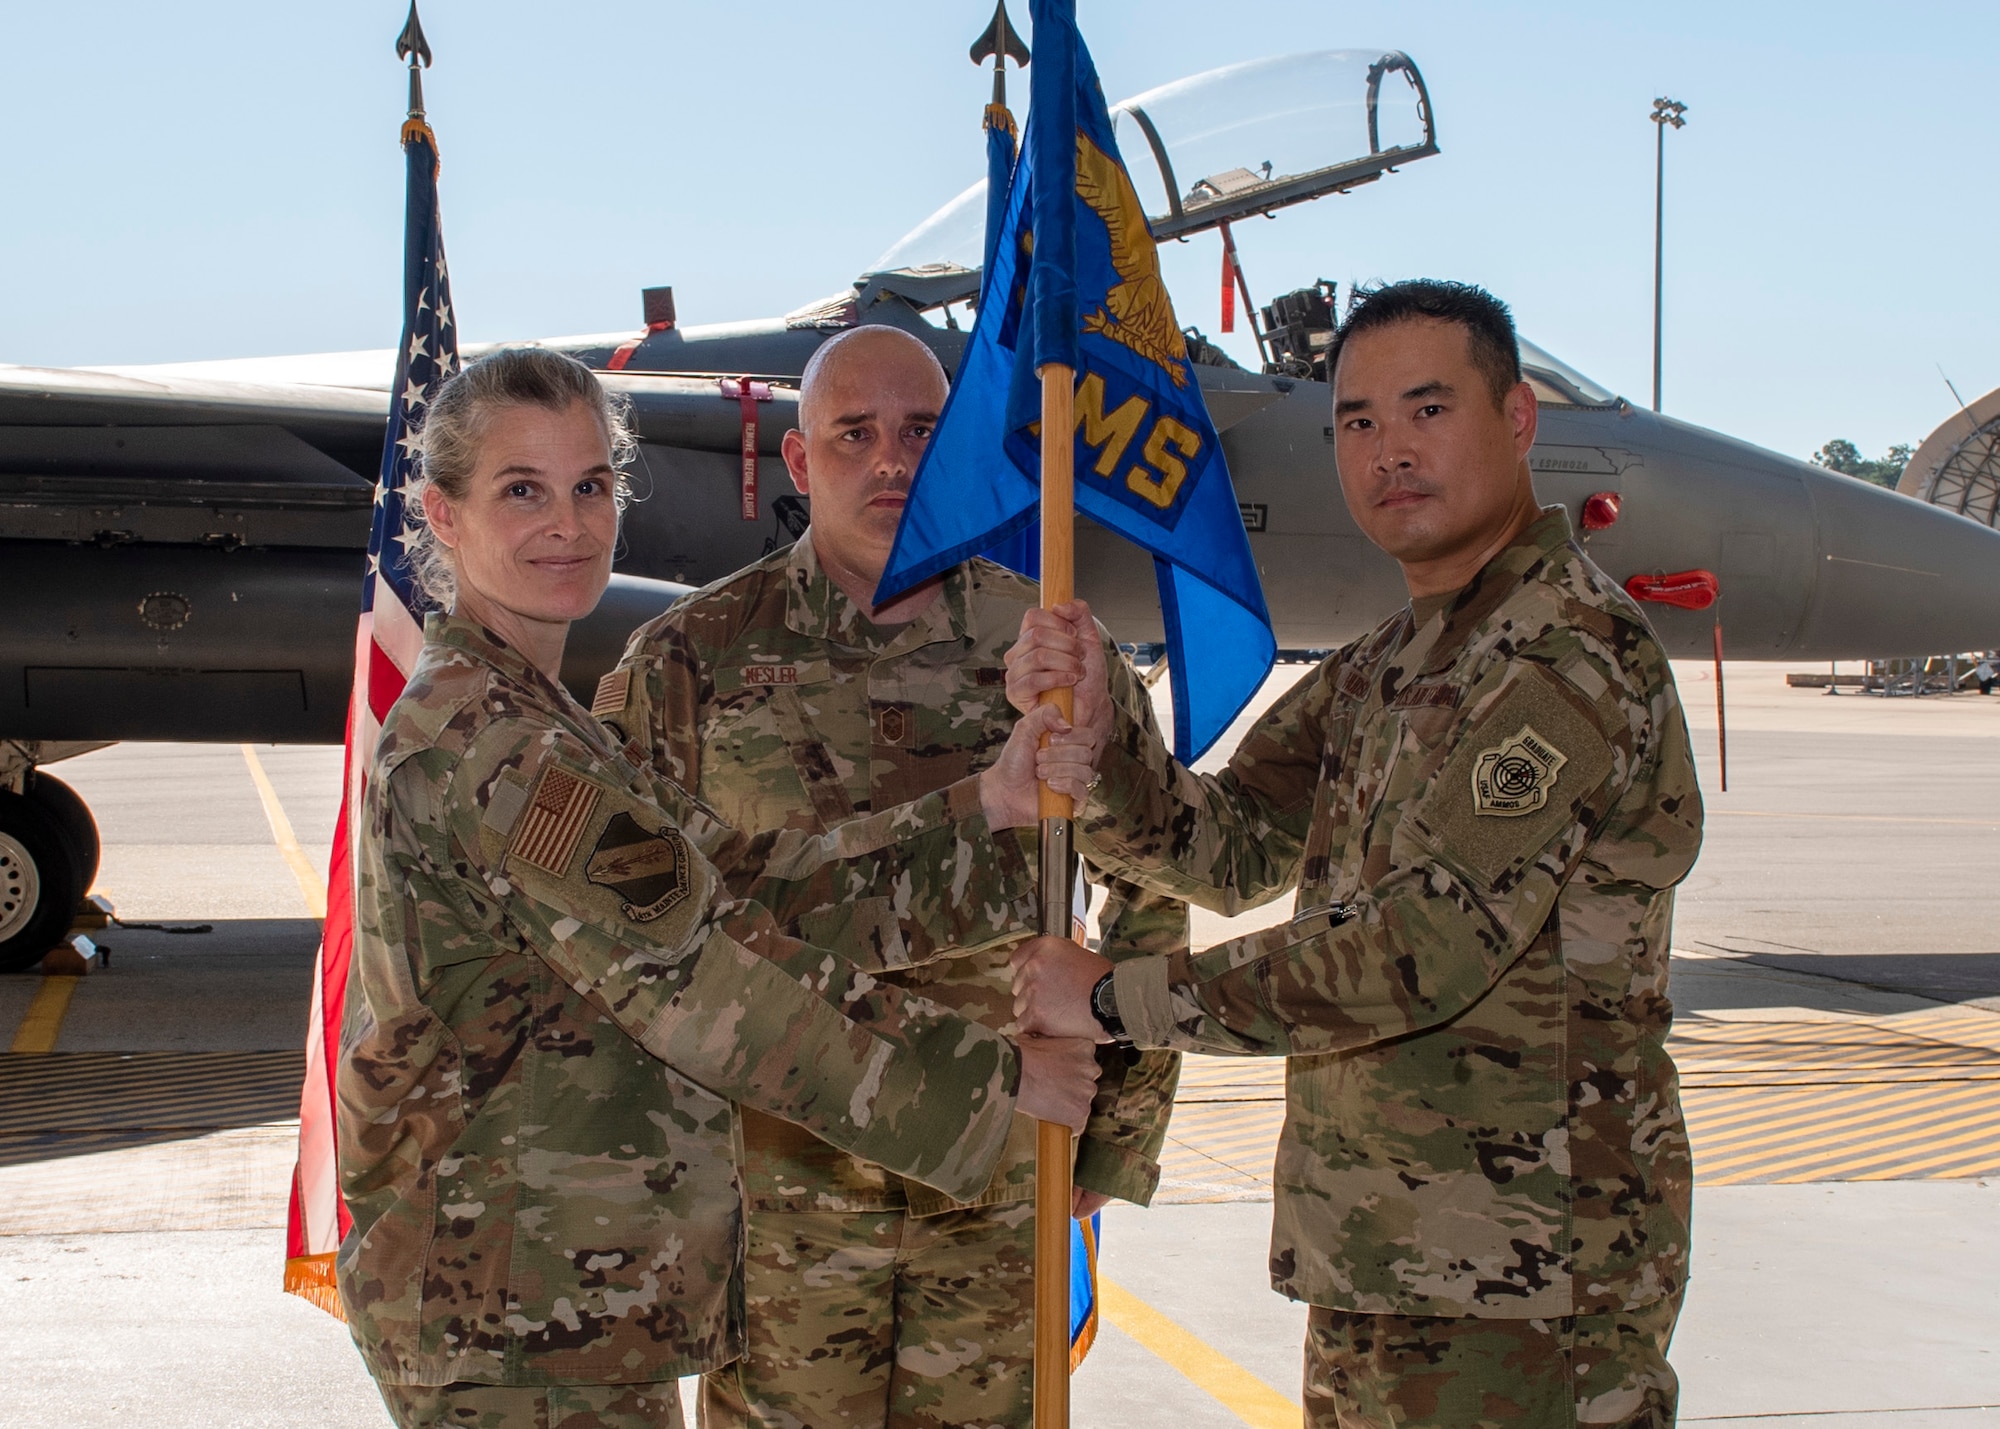 Col. Leah R. Fry, 4th Maintenance Group commander (left), passes the guidon to Maj. Ryan B. Hudson (right), as Hudson assumes command of the 4th Equipment Maintenance Squadron during a change of command ceremony at Seymour Johnson Air Force Base, North Carolina, June 26, 2020.